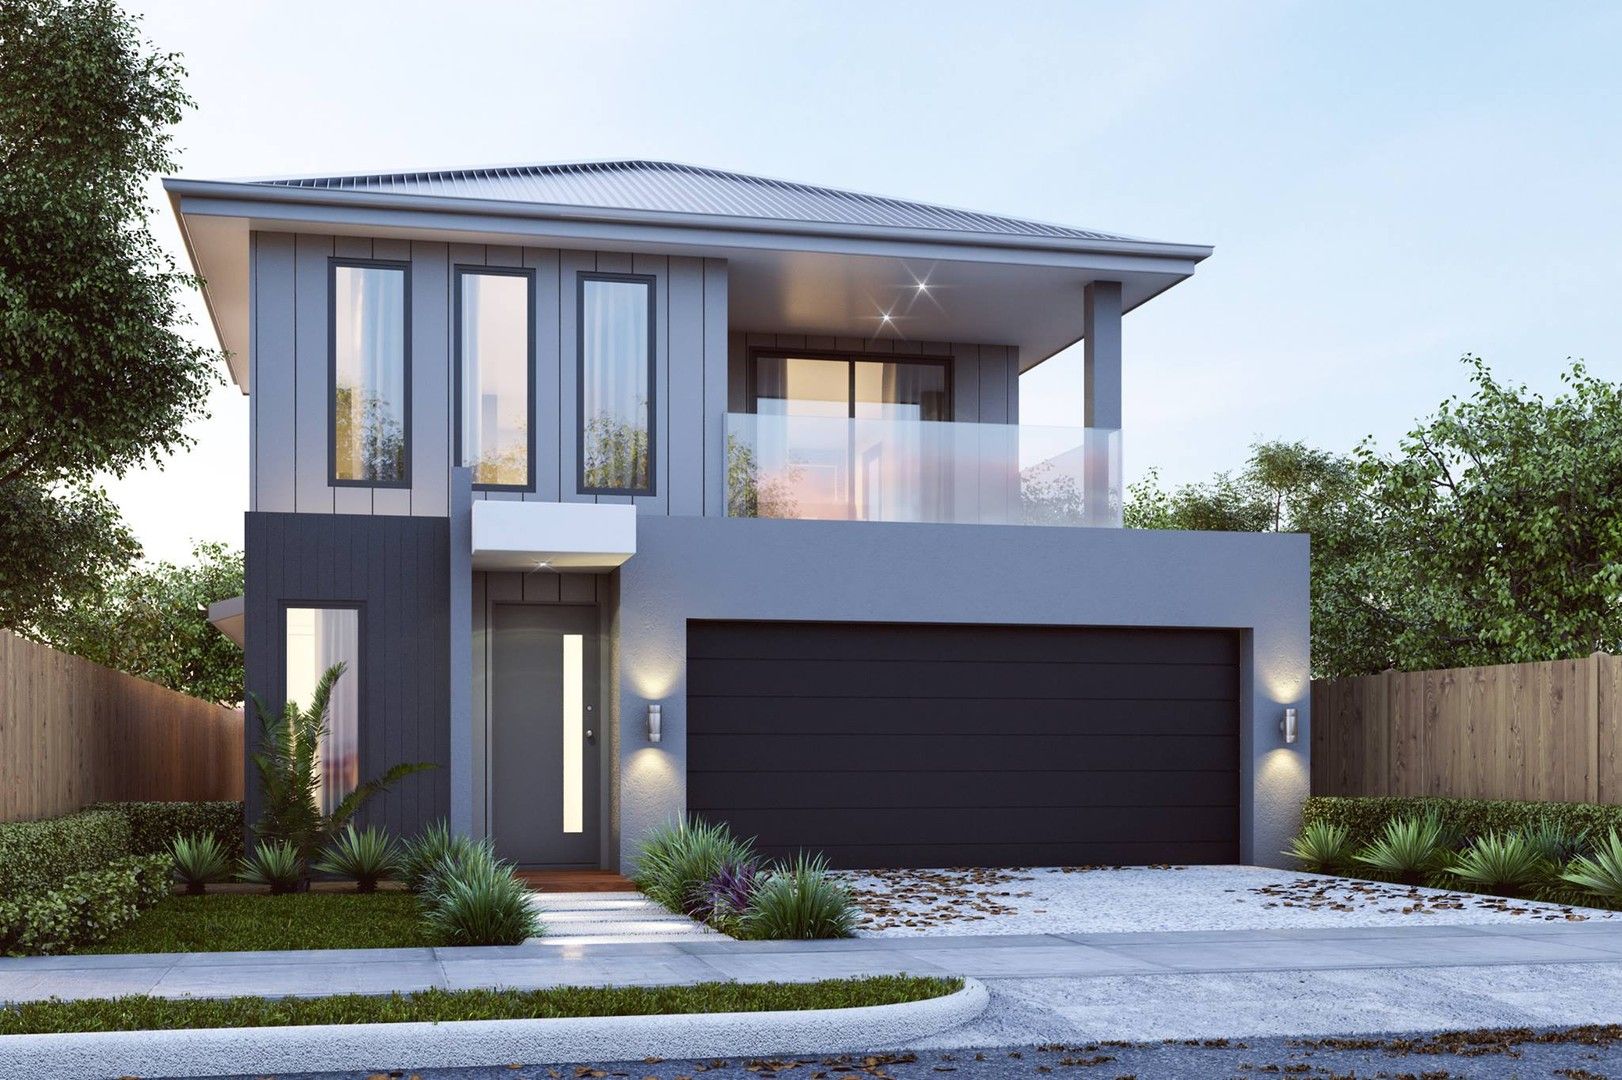 4 bedrooms New House & Land in WALK TO SANTA SOPHIA COLLEGE BOX HILL NSW, 2765